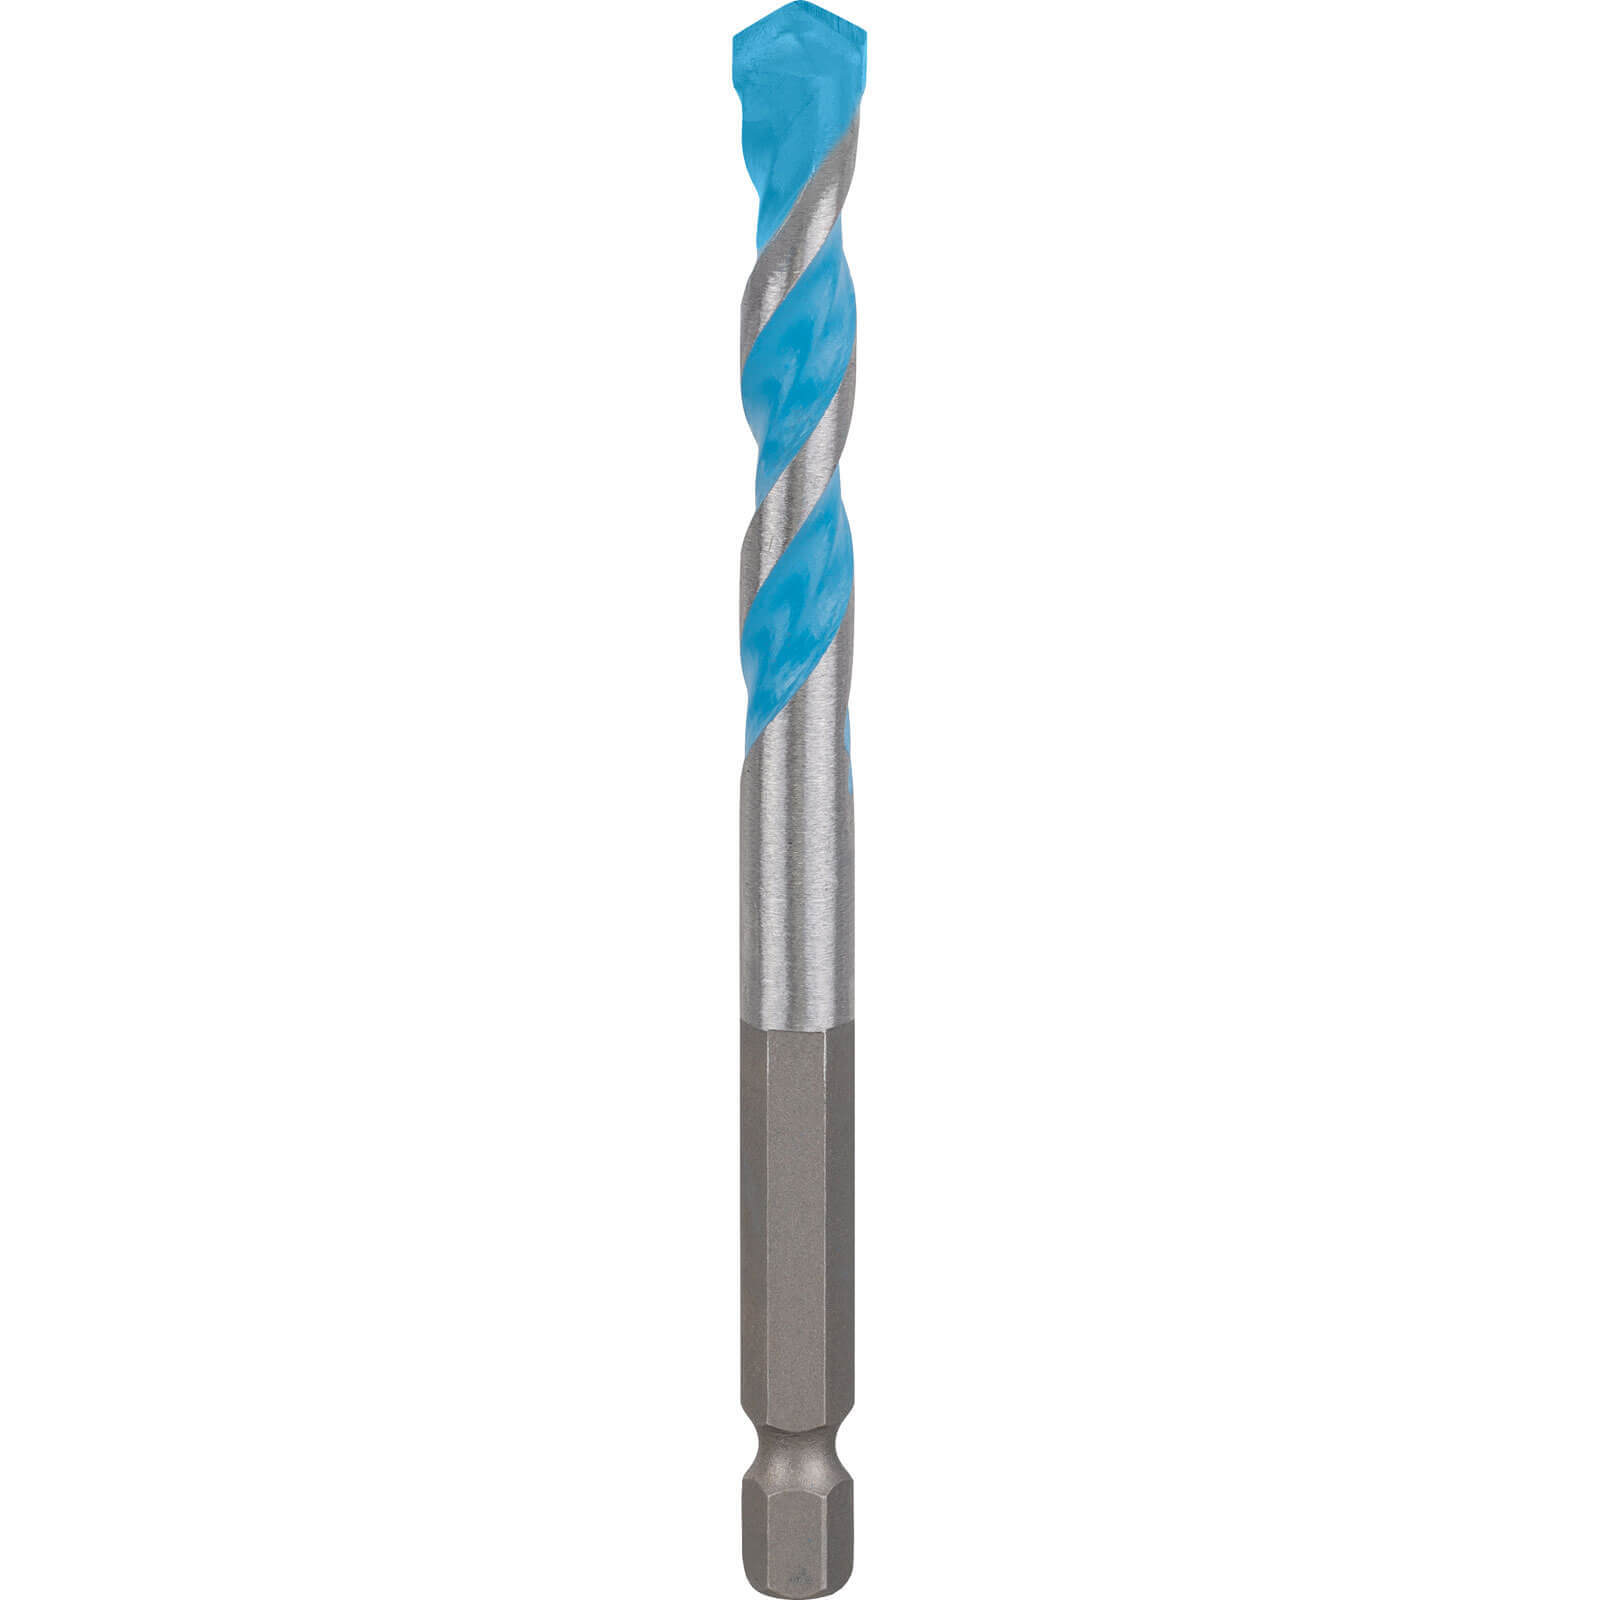 Image of Bosch Expert HEX-9 Multi Construction Drill Bit 8mm 100mm Pack of 1